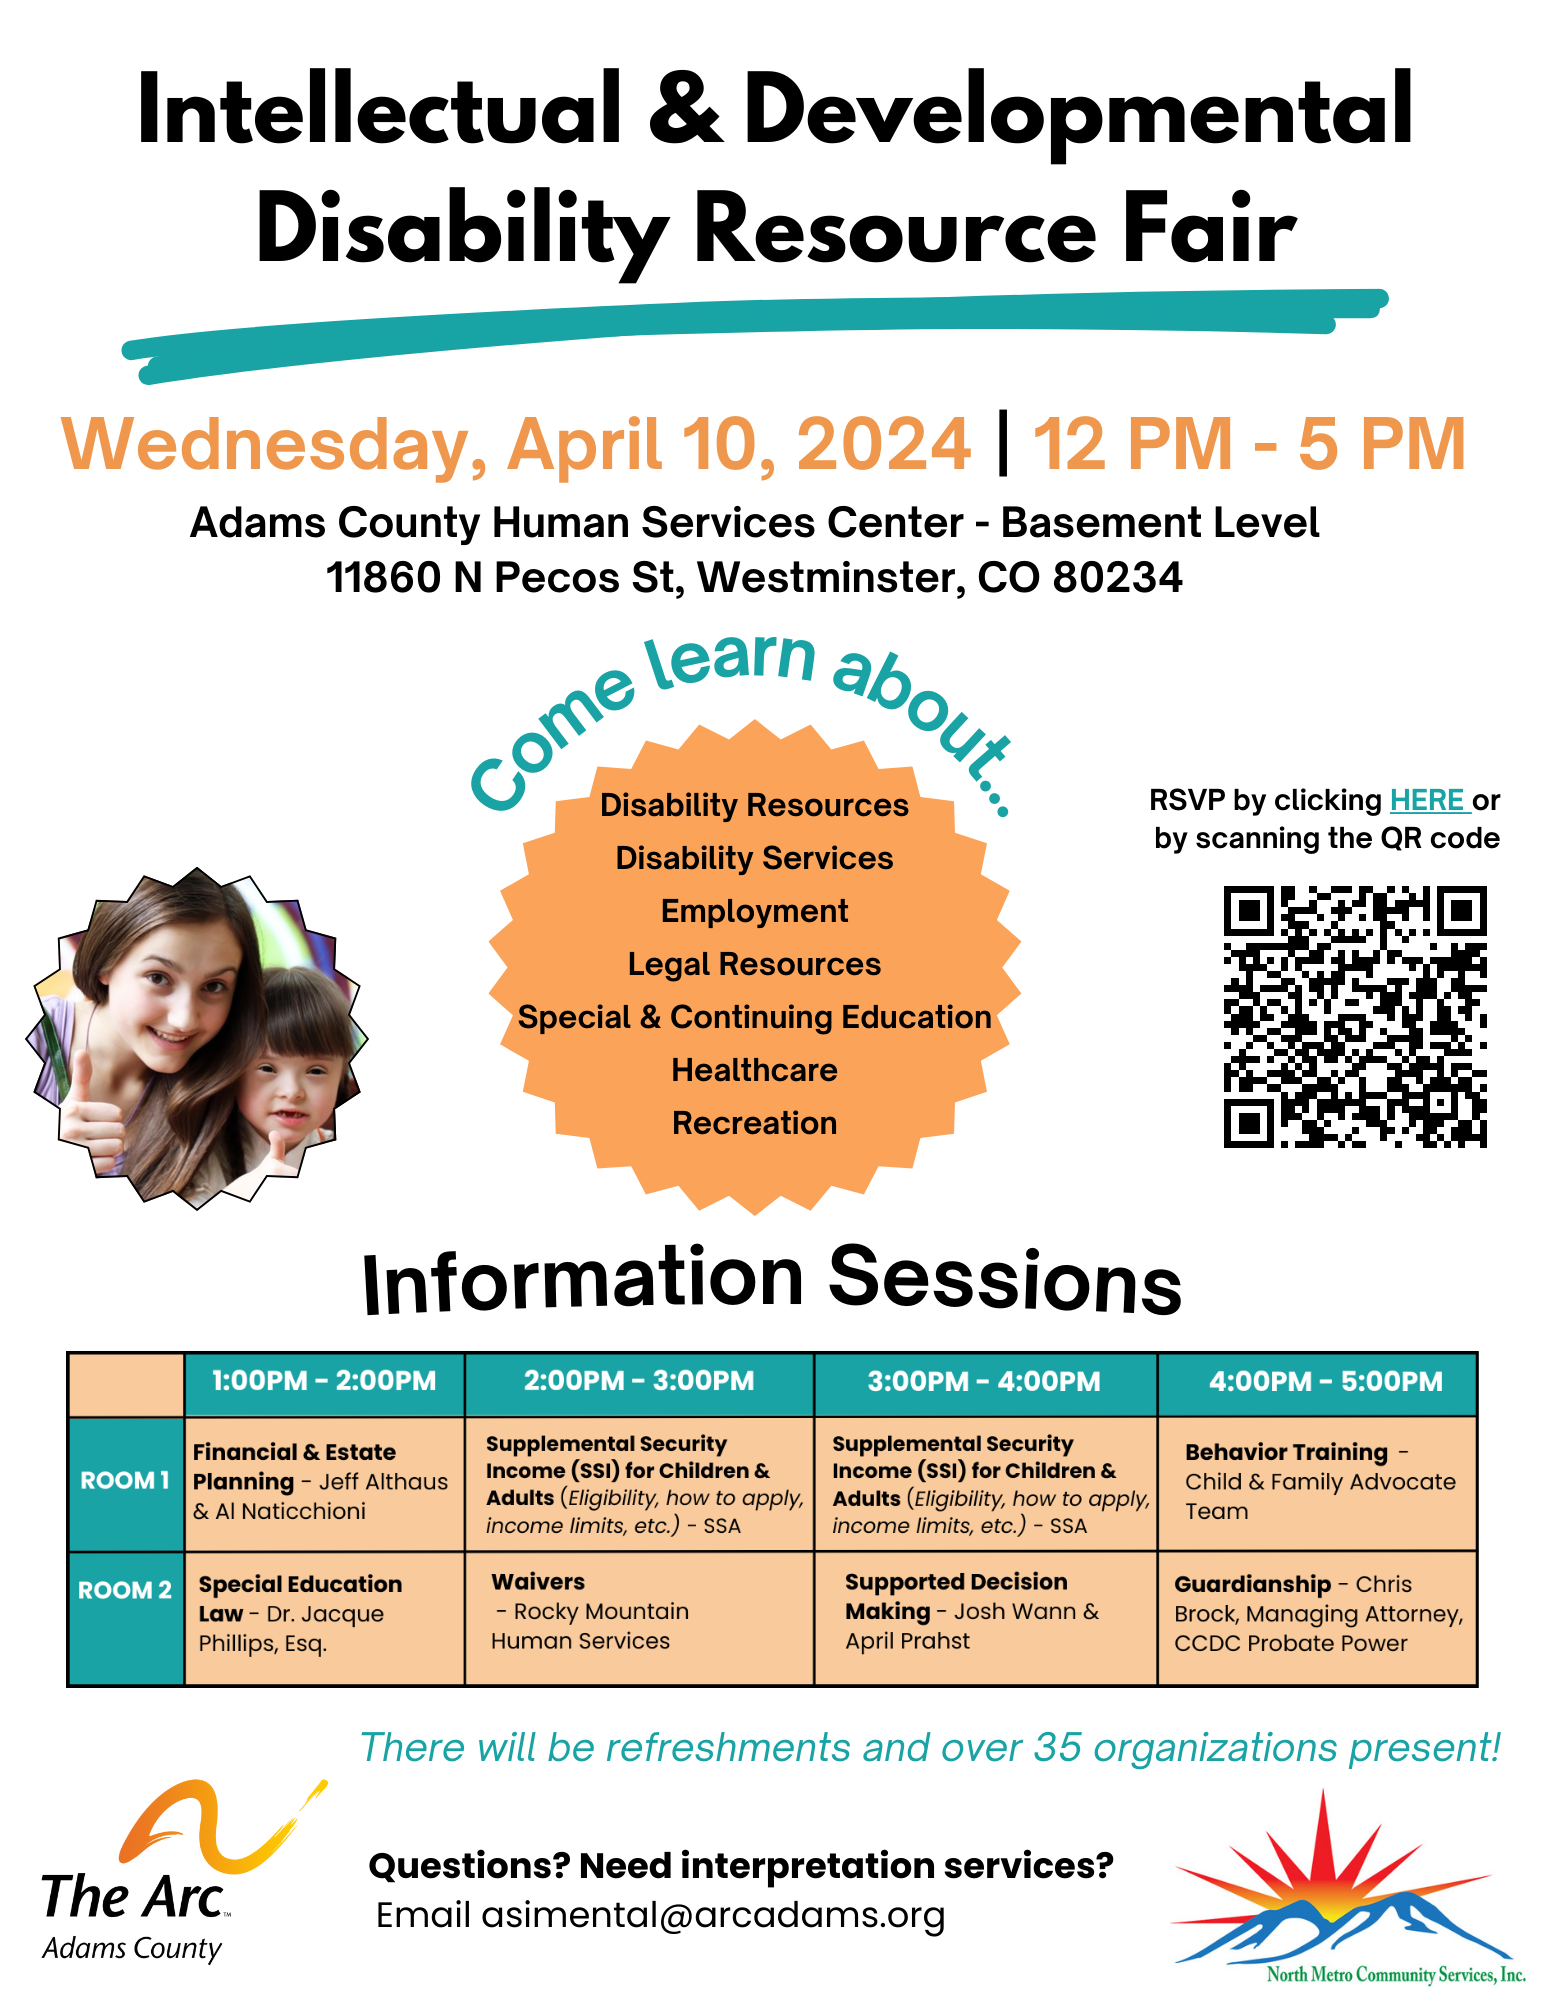 disability resource fair. more information? call 720 736 7730